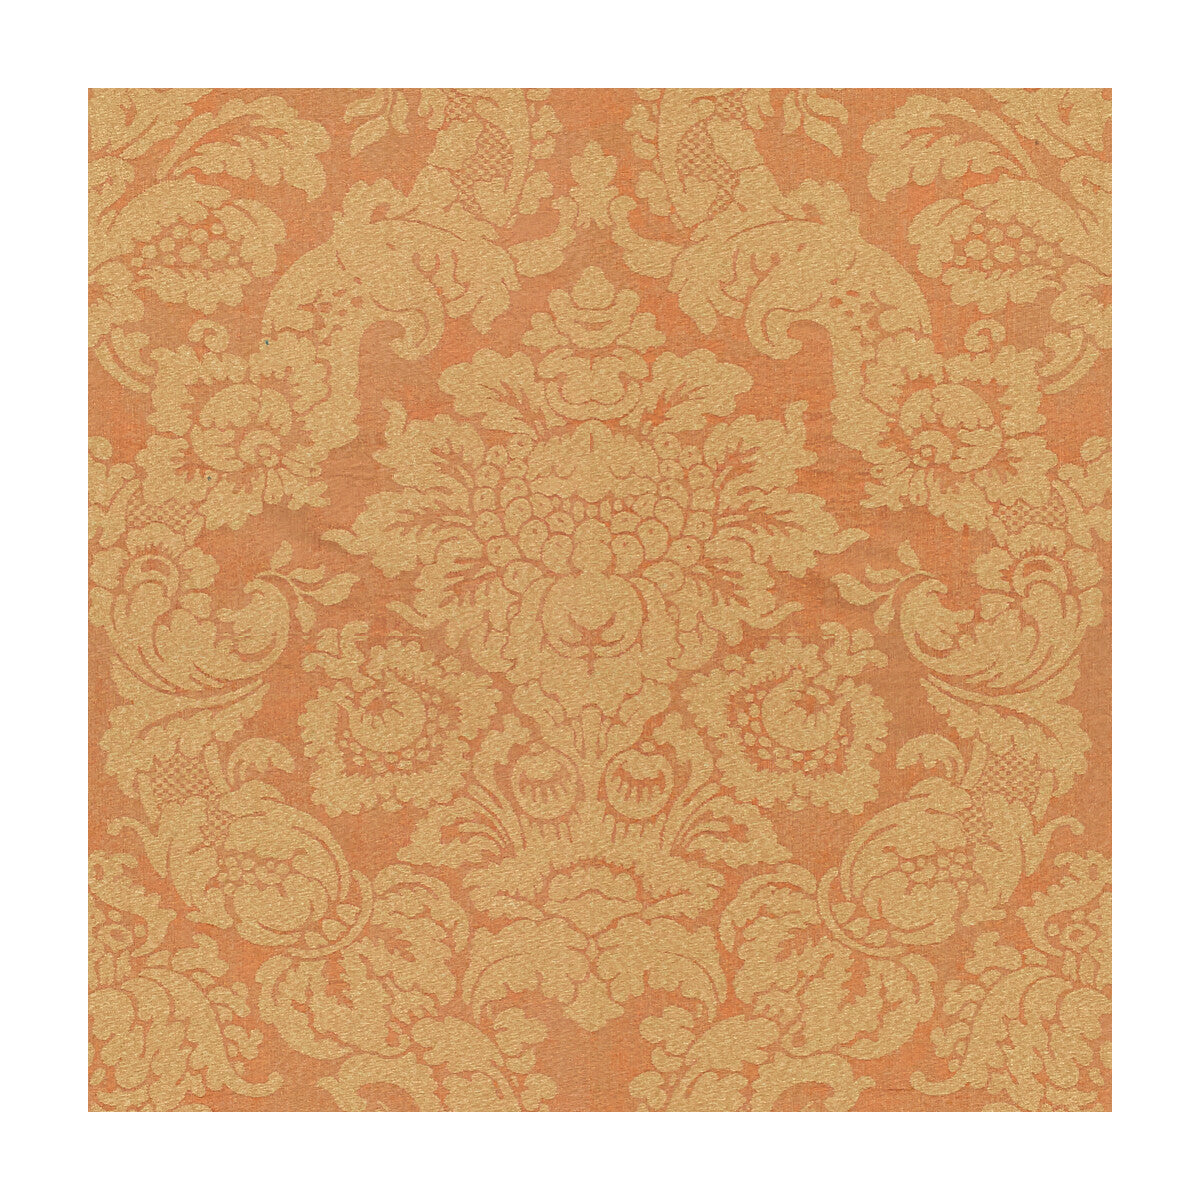 Le Grenate fabric in coral color - pattern 2015116.12.0 - by Lee Jofa in the Parish-Hadley collection